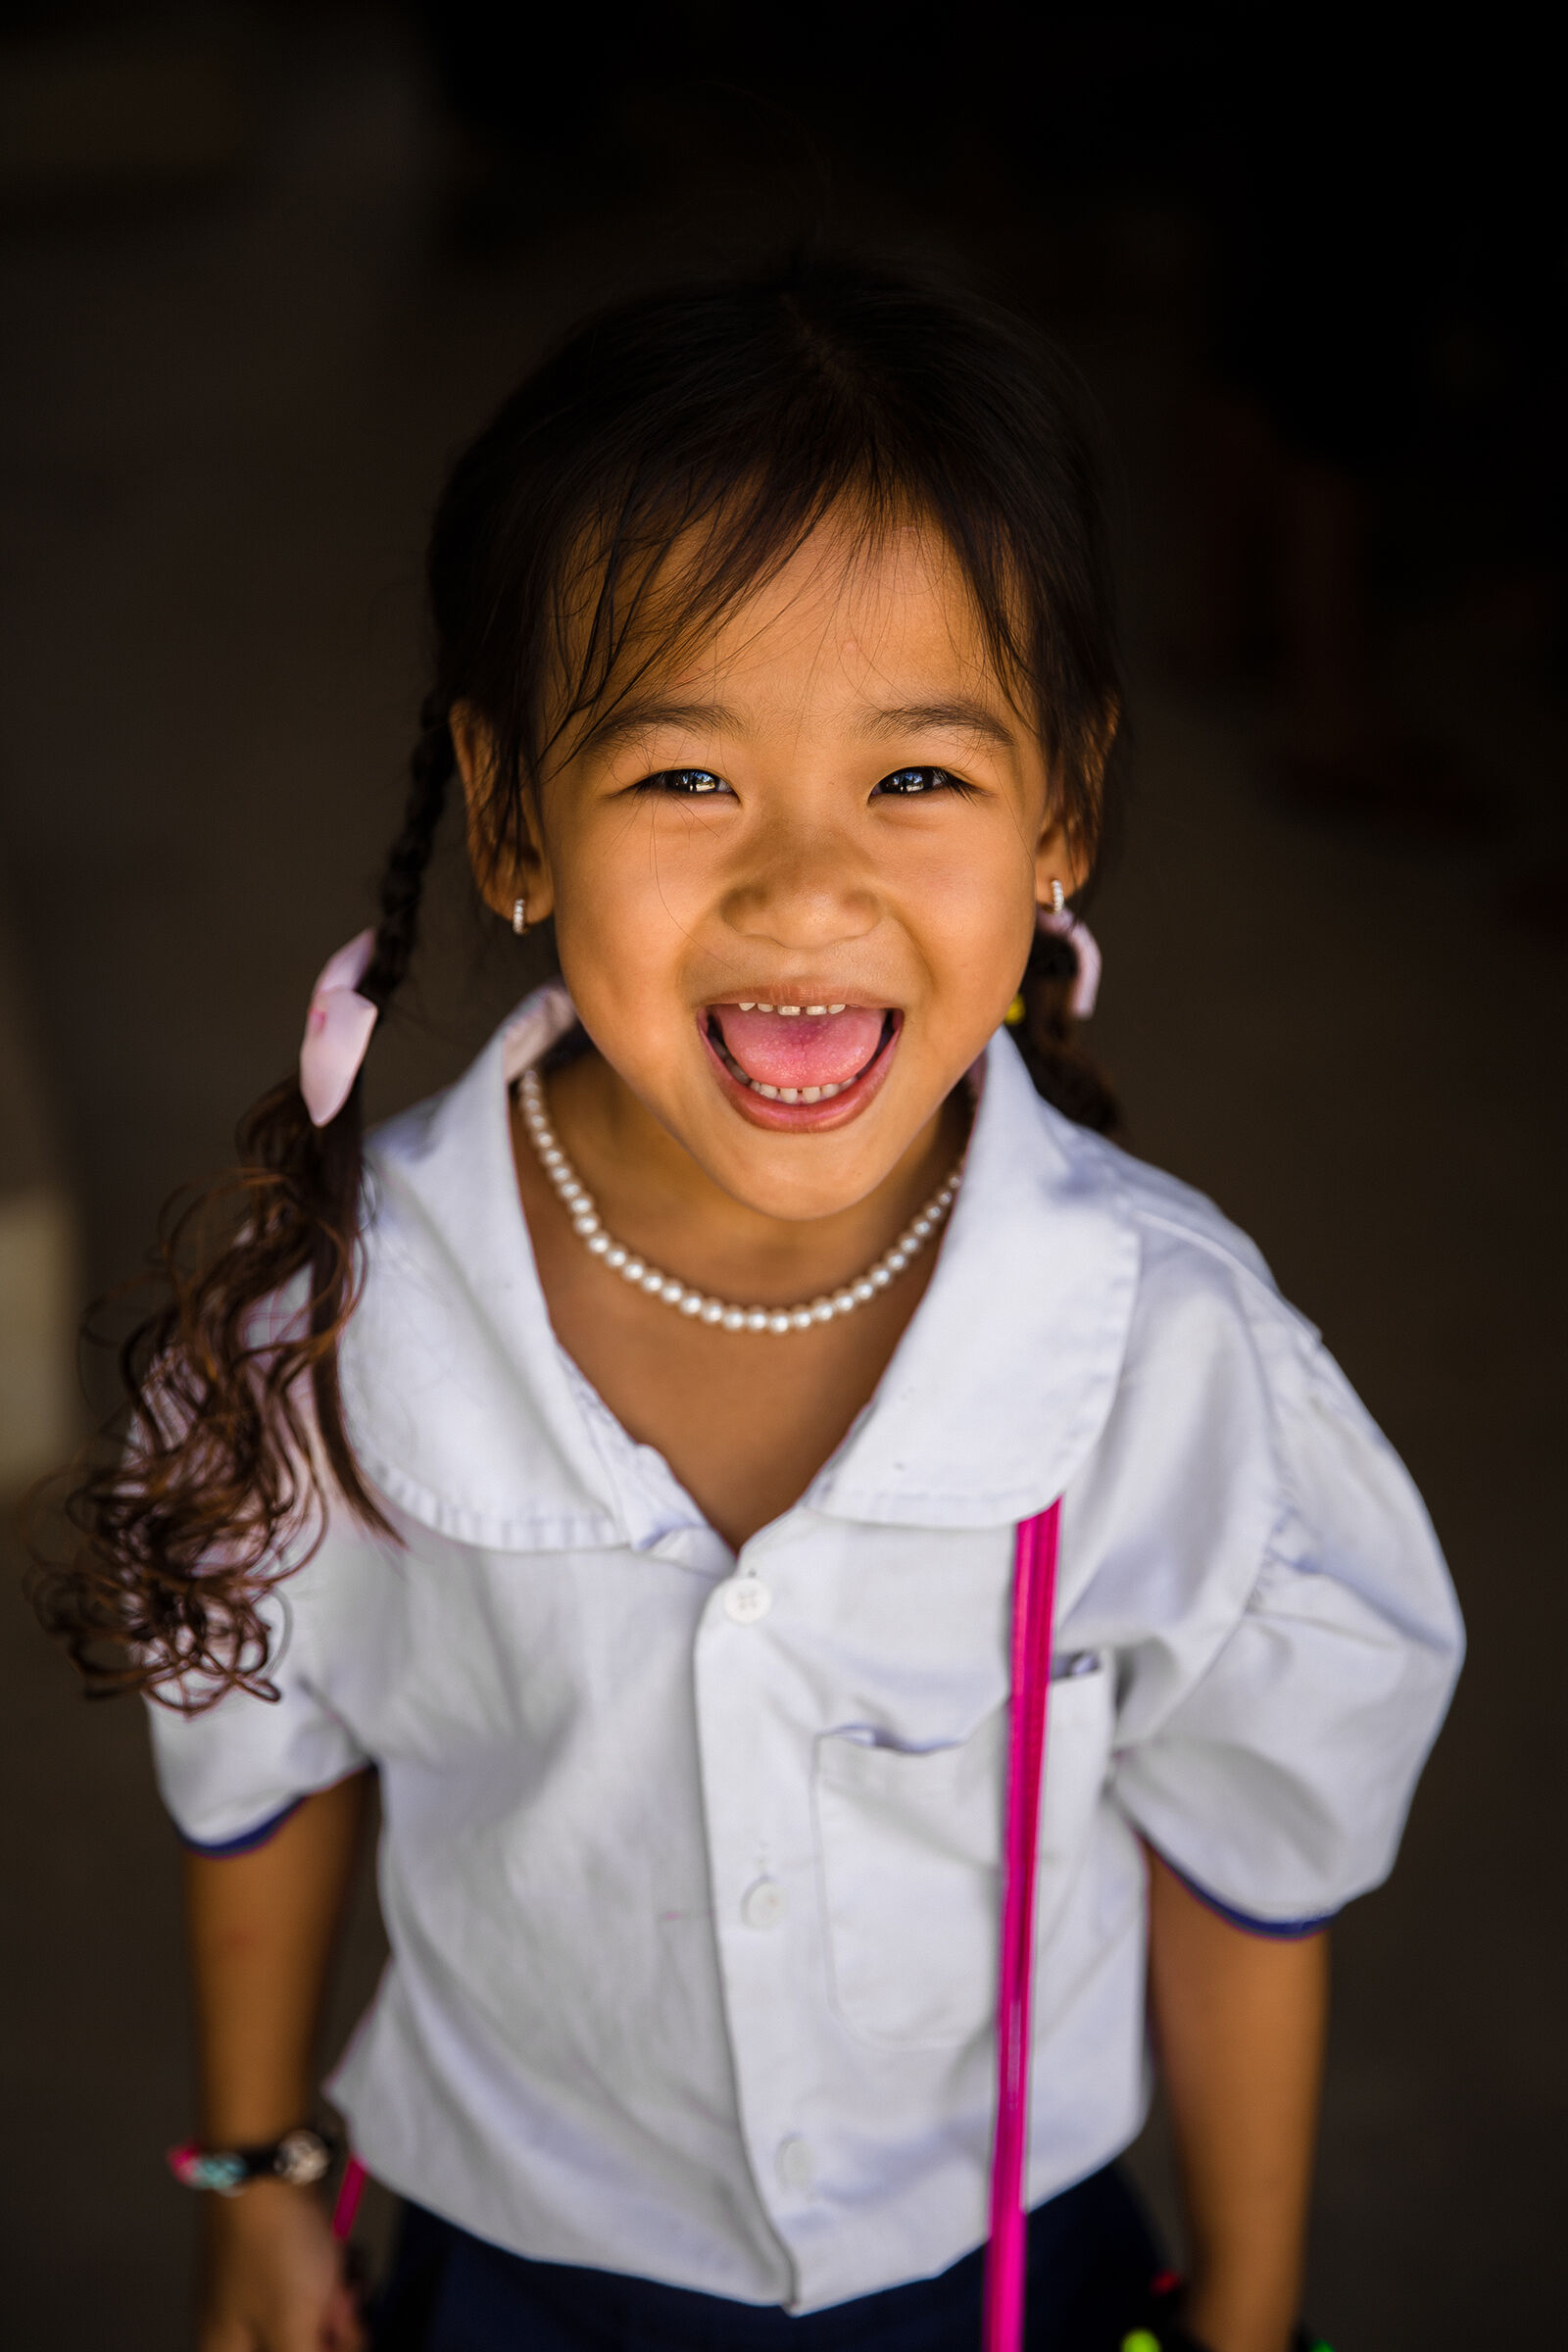 A smiling Cambodian girl...